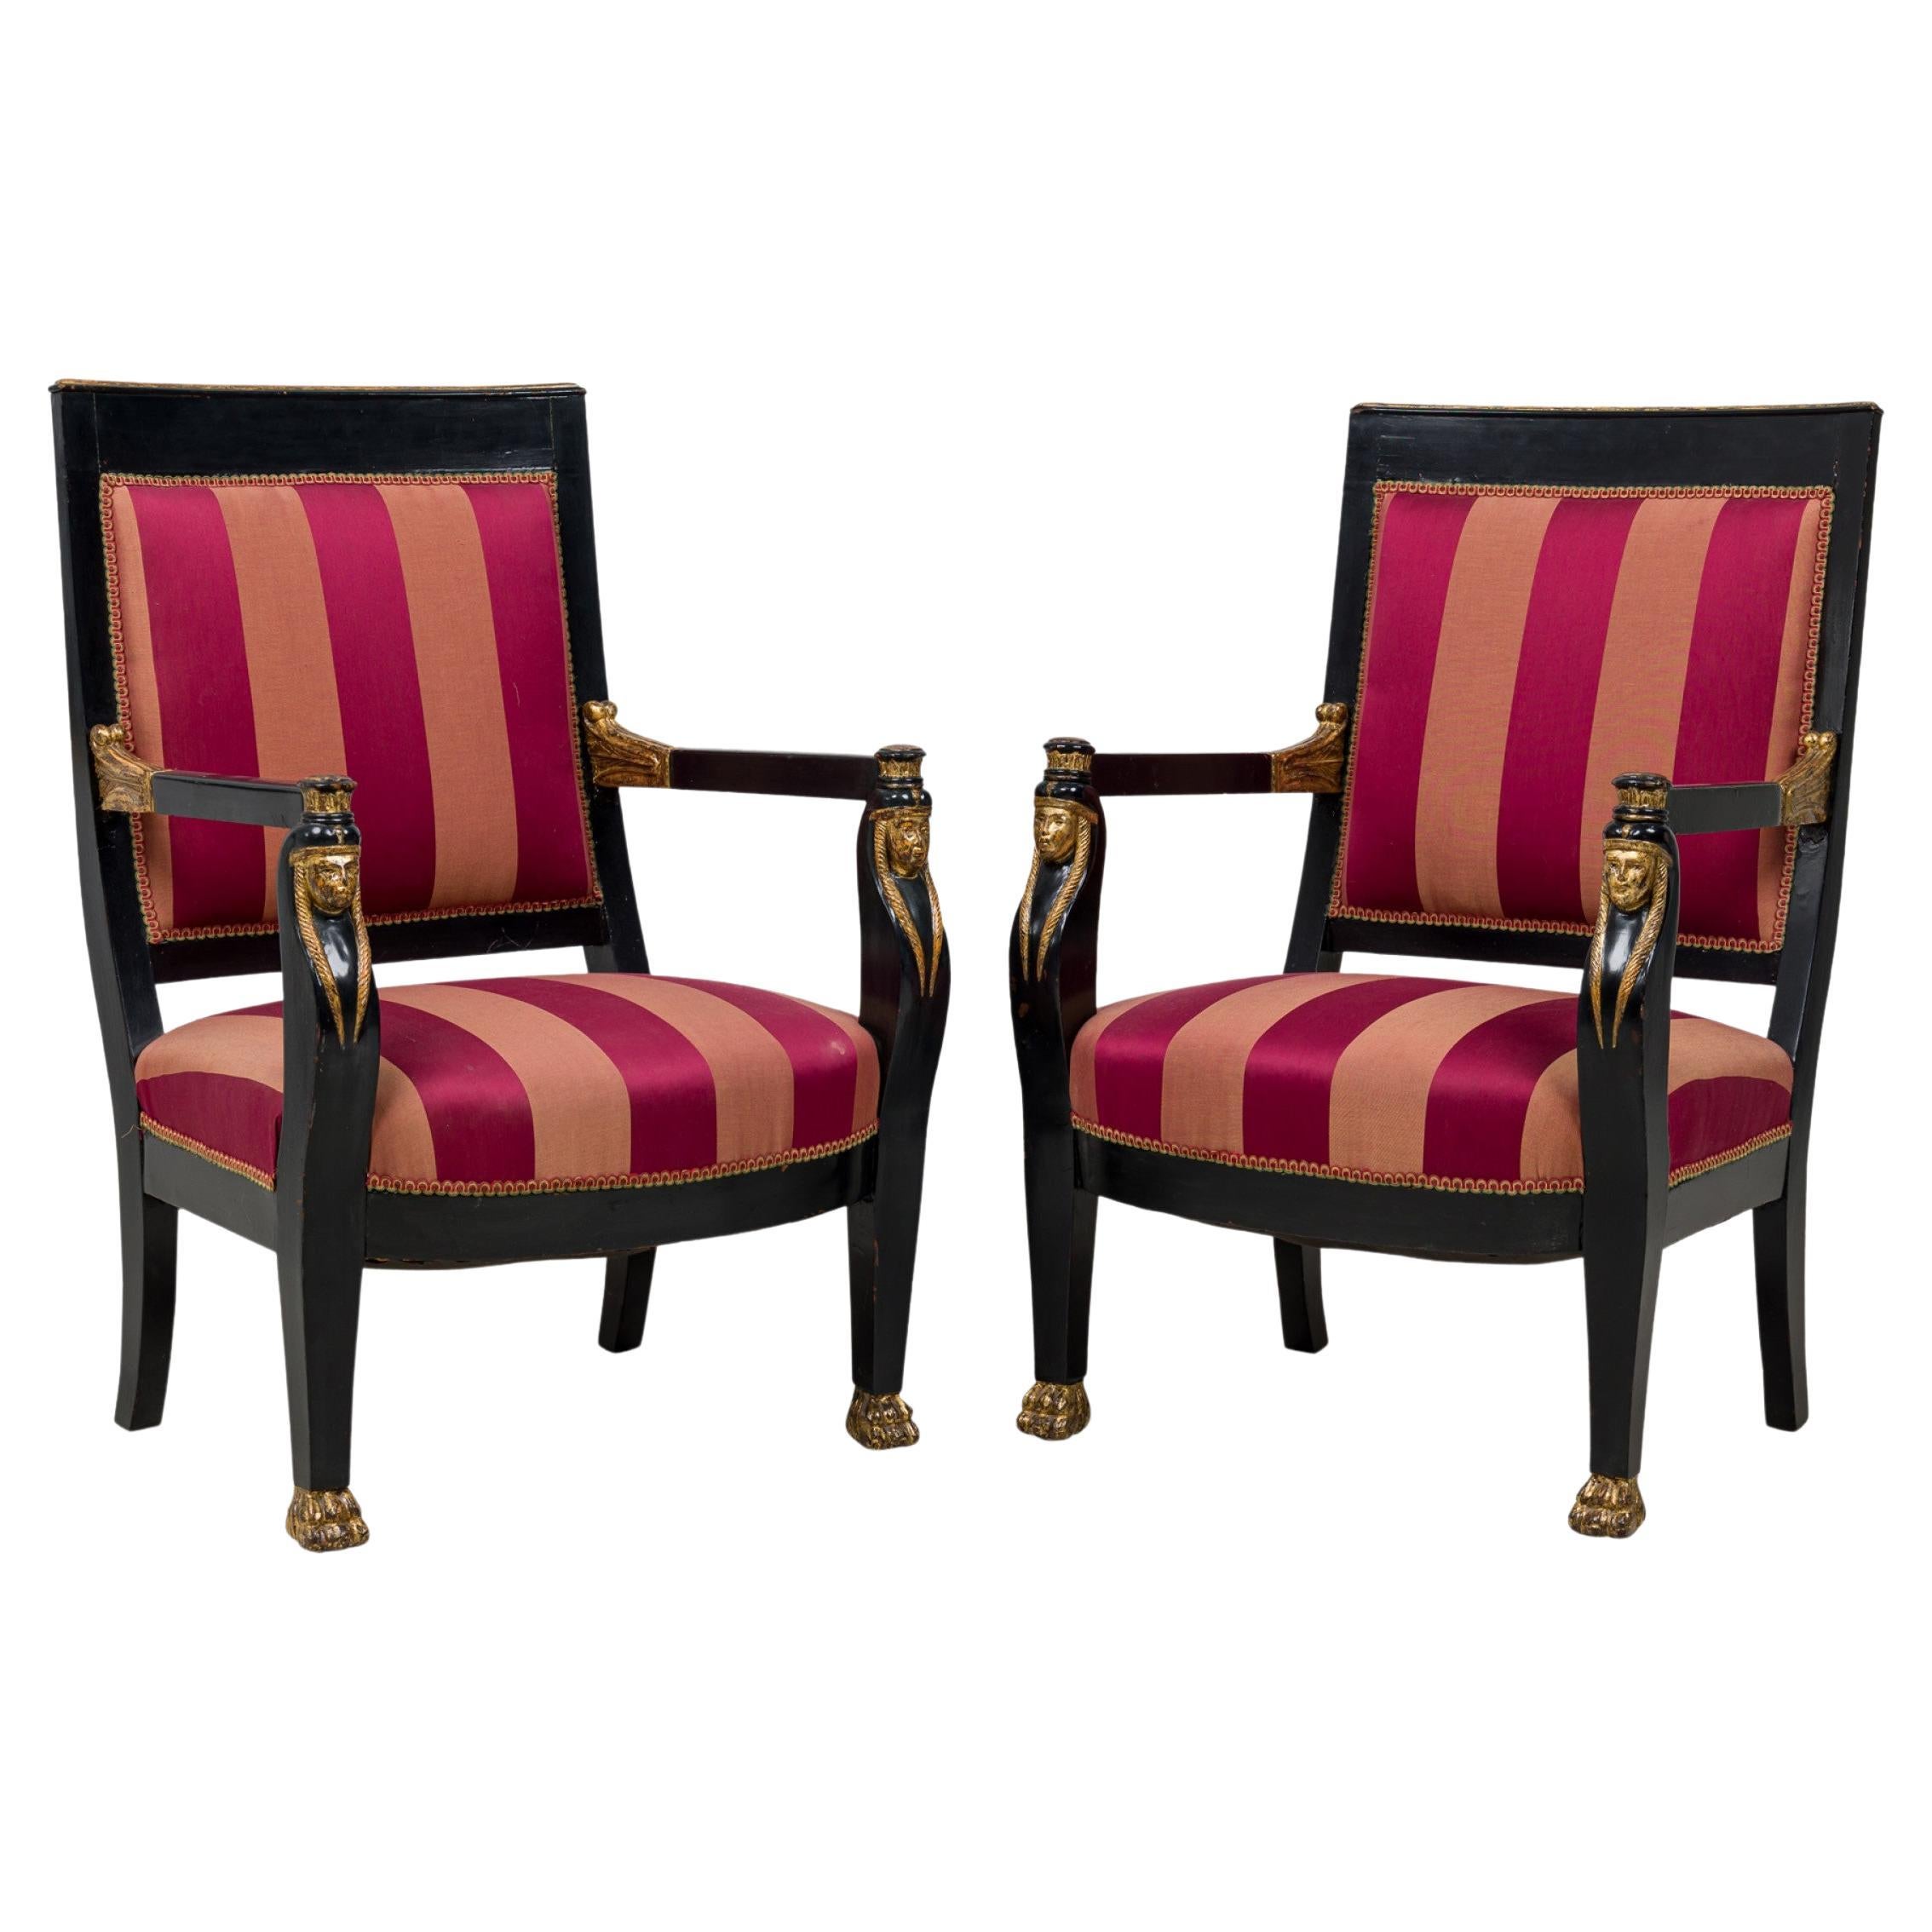 Pair of Italian Neo-Classic Ebonized and Parcel-Gilt Red Upholstered Armchairs